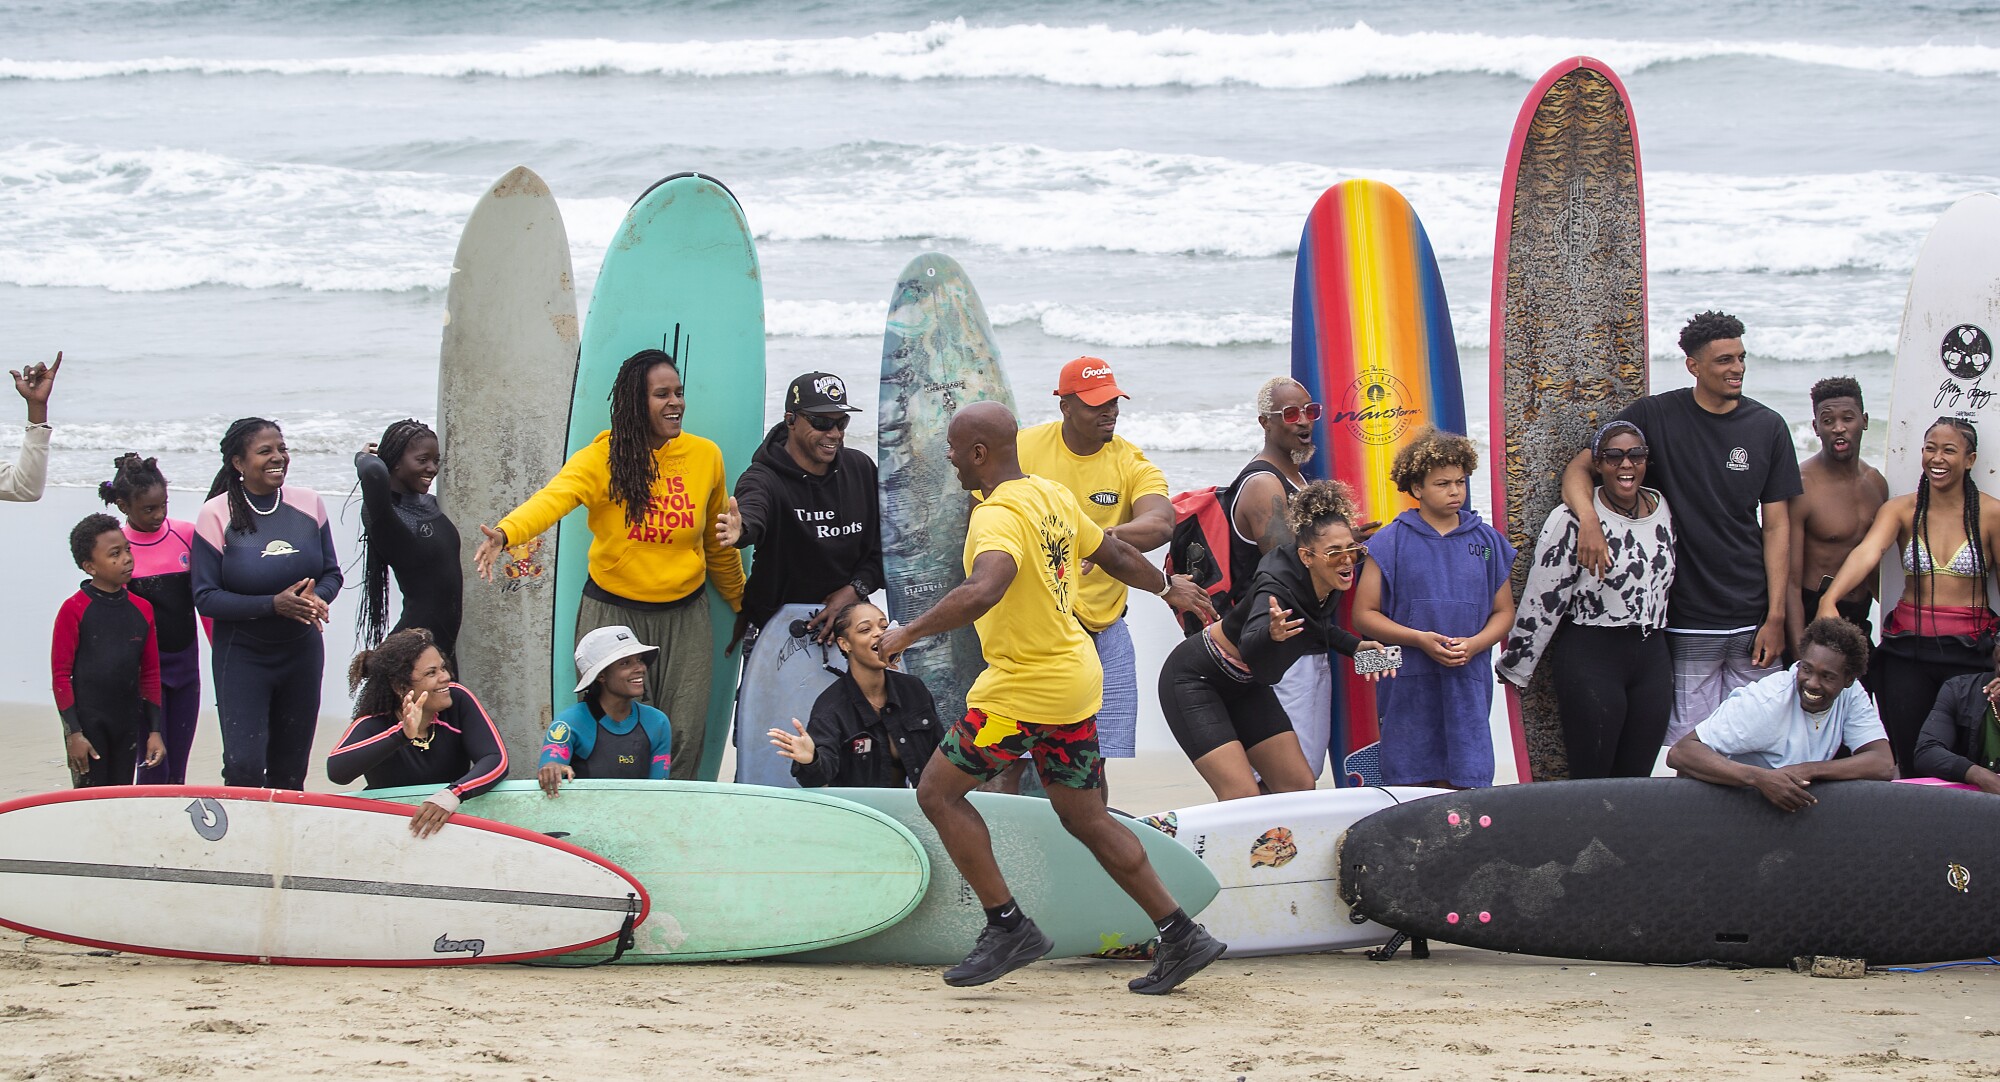 Surfers line up for a group photo